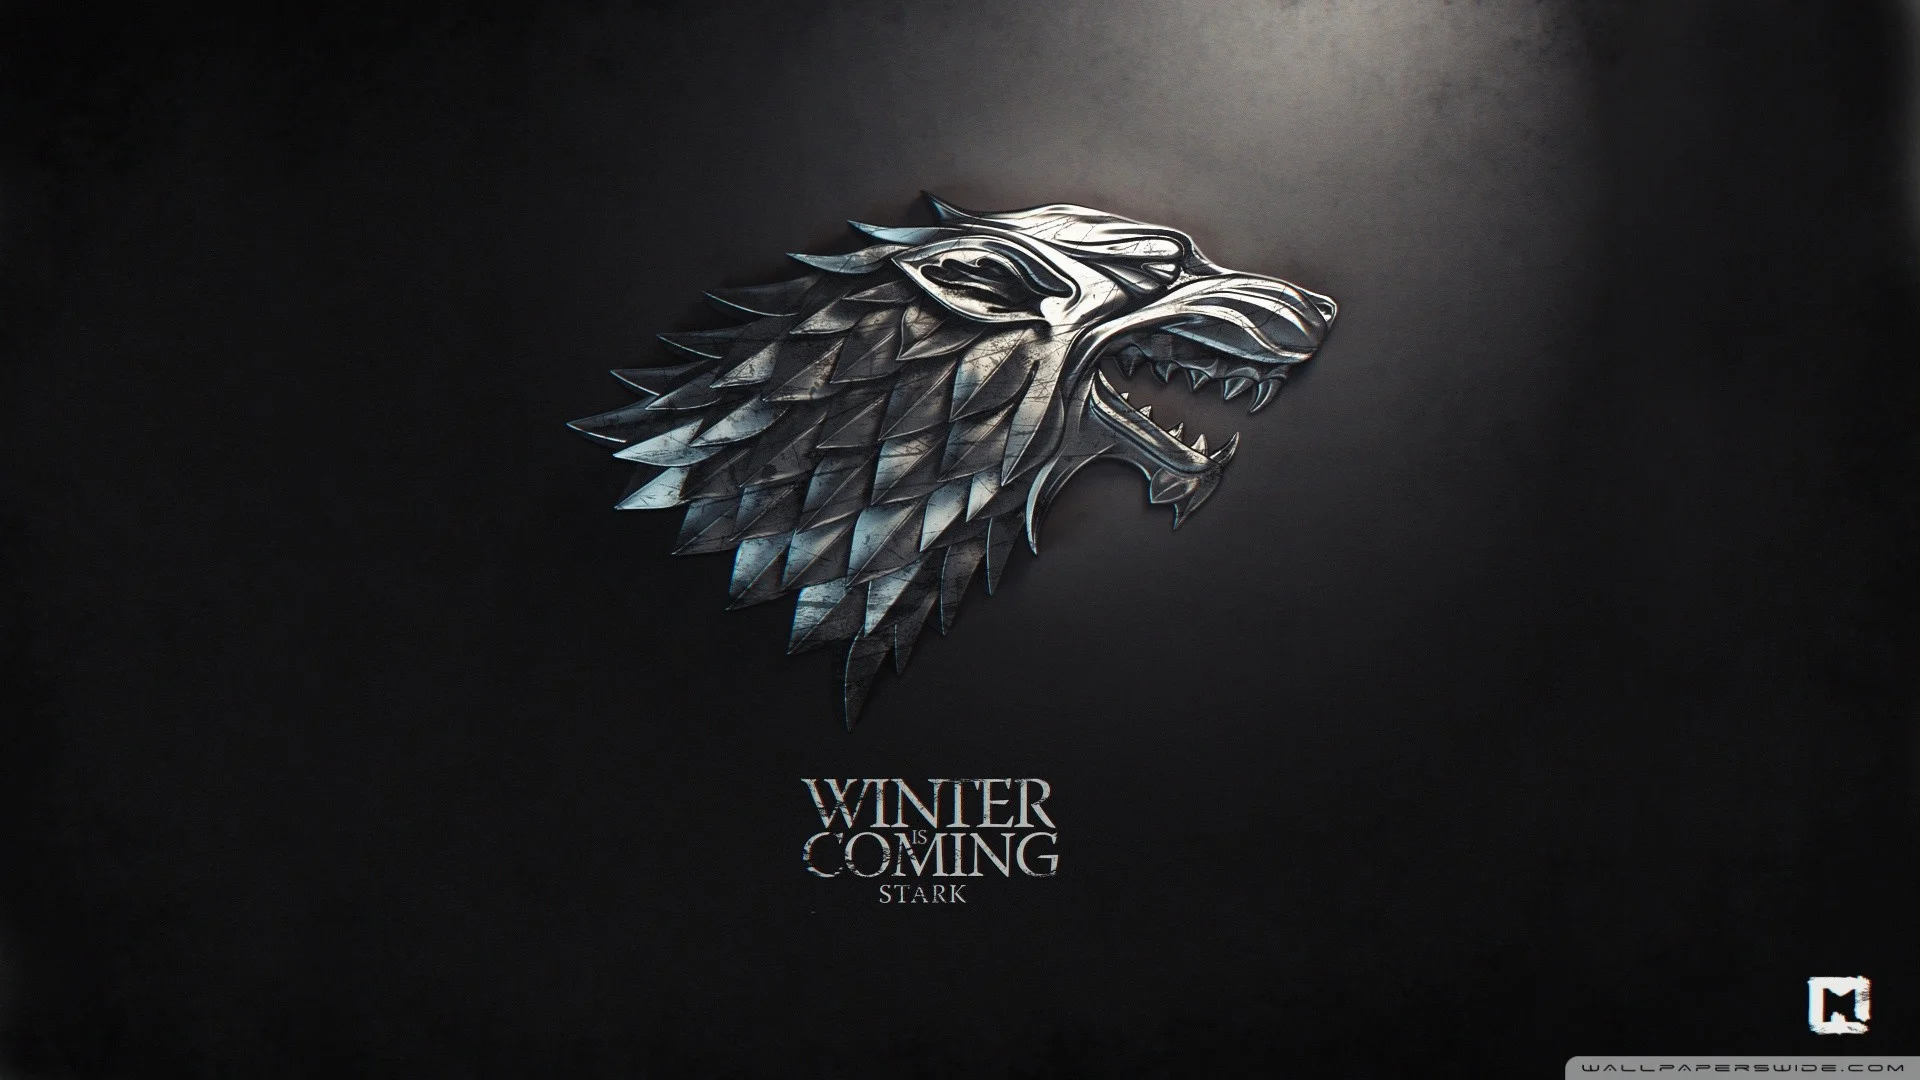 Game Of Thrones Winter Is Coming Stark HD Wide Wallpaper for Widescreen